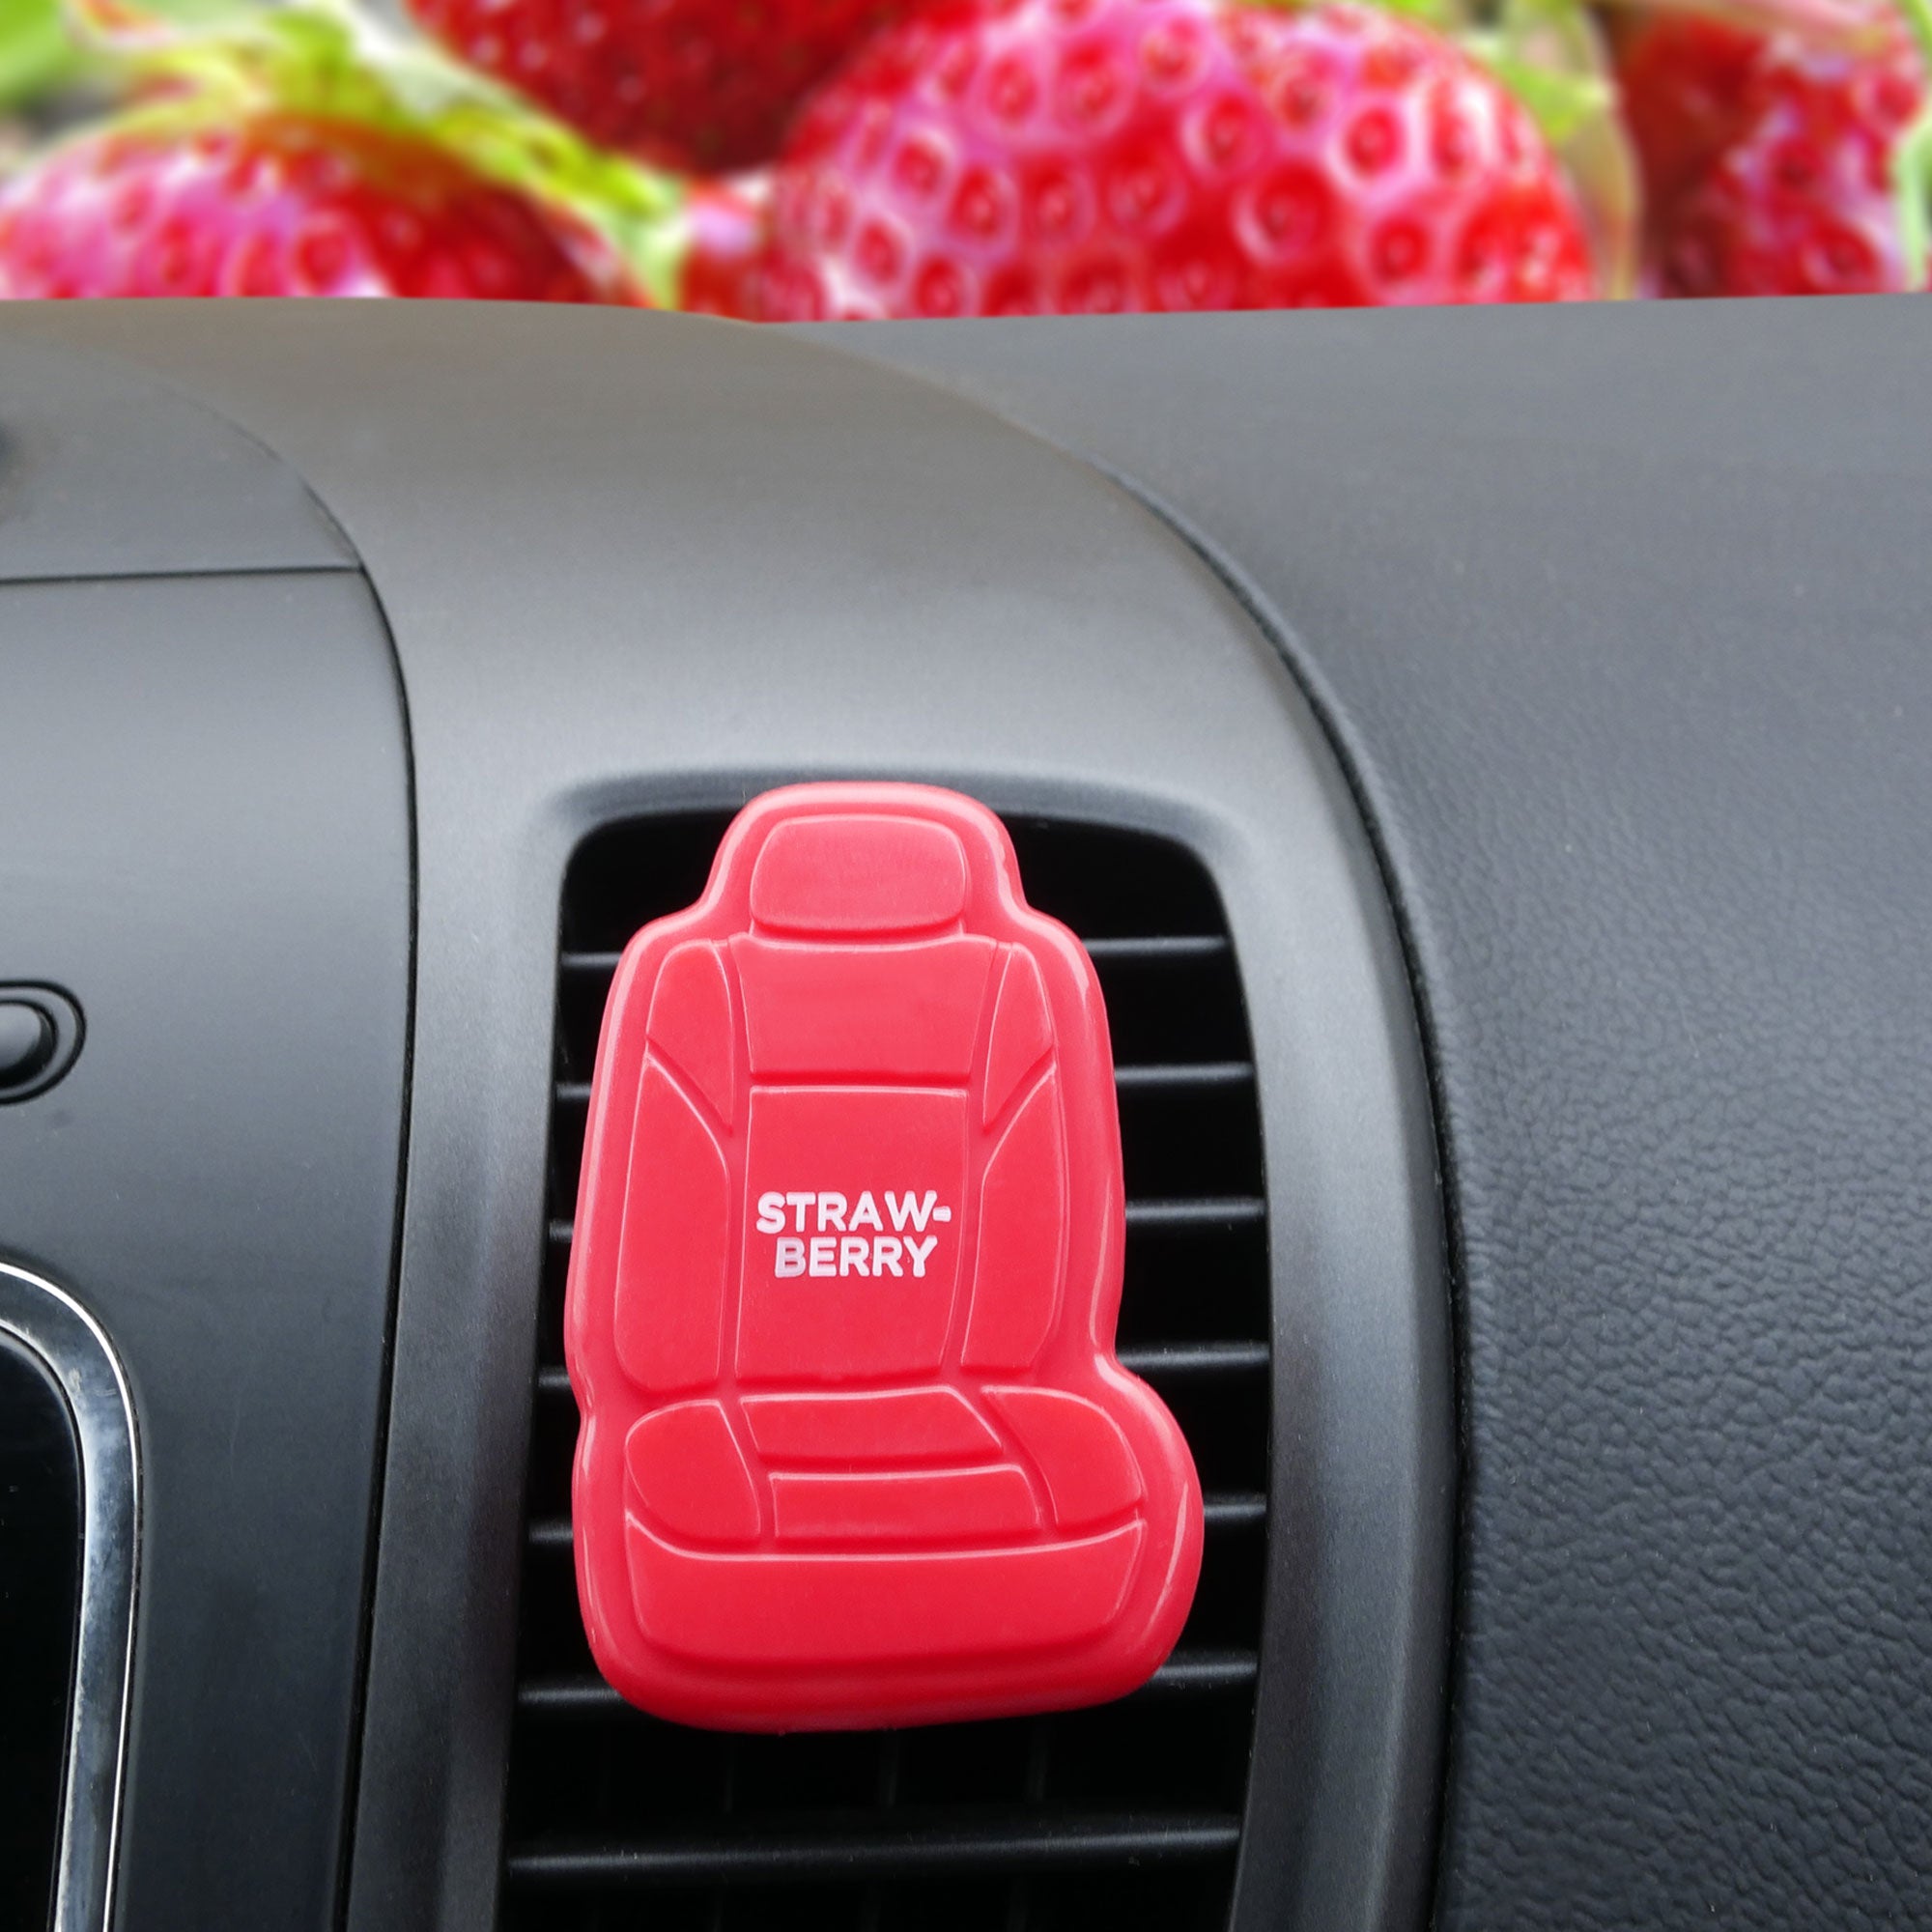 FH Group Vanilla 3D Scented Cream Air Freshener 1-Pack Clip-On Non-Toxic,  Plastic Alcohol-Free Fragrance Oil Car Seat Shape Long Lasting for Cars